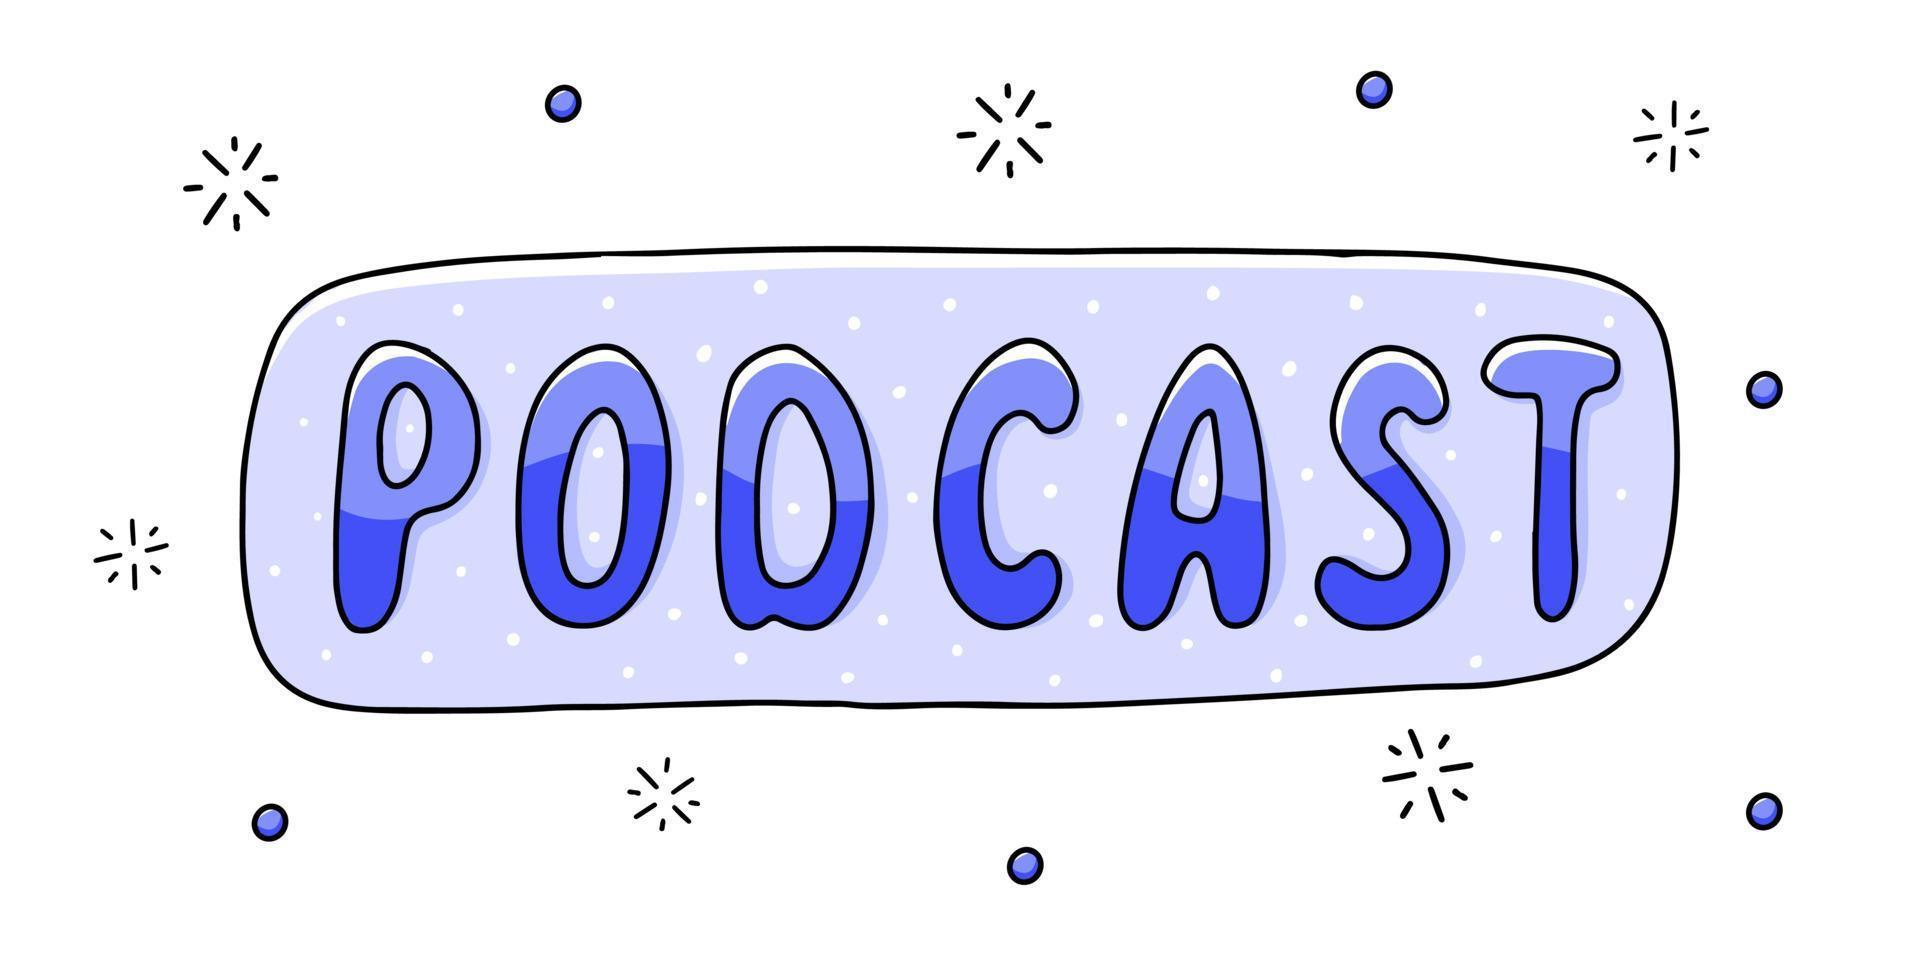 Podcast - hand-written lettering. Vector hand drawn illustration with small elements. Doodle style.